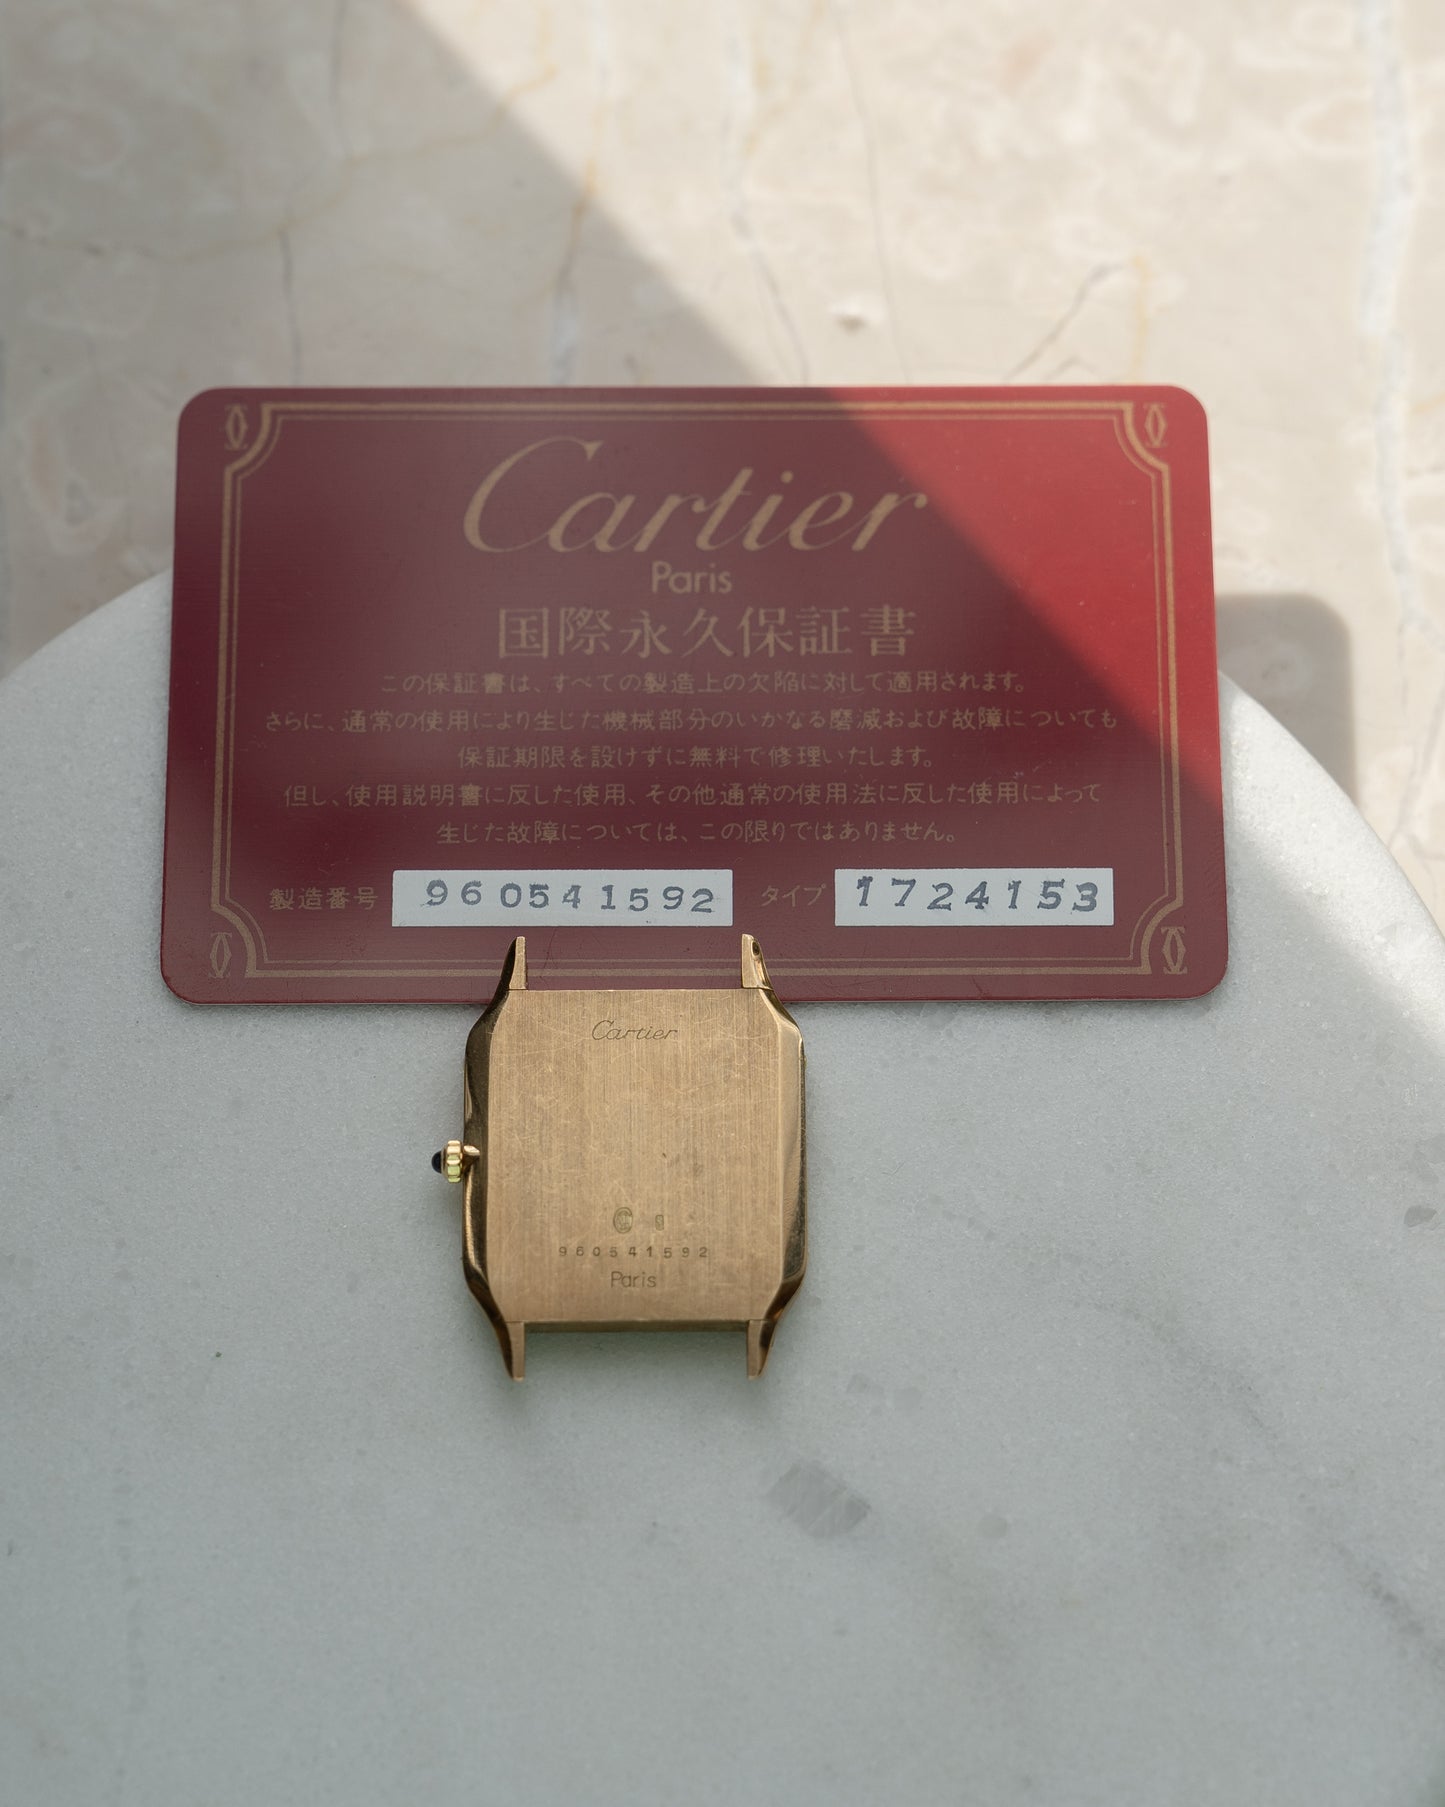 Cartier Santos-Dumont "Ultra Thin" LM size in 18k Yellow Gold with lifetime guarantee card, box & papers